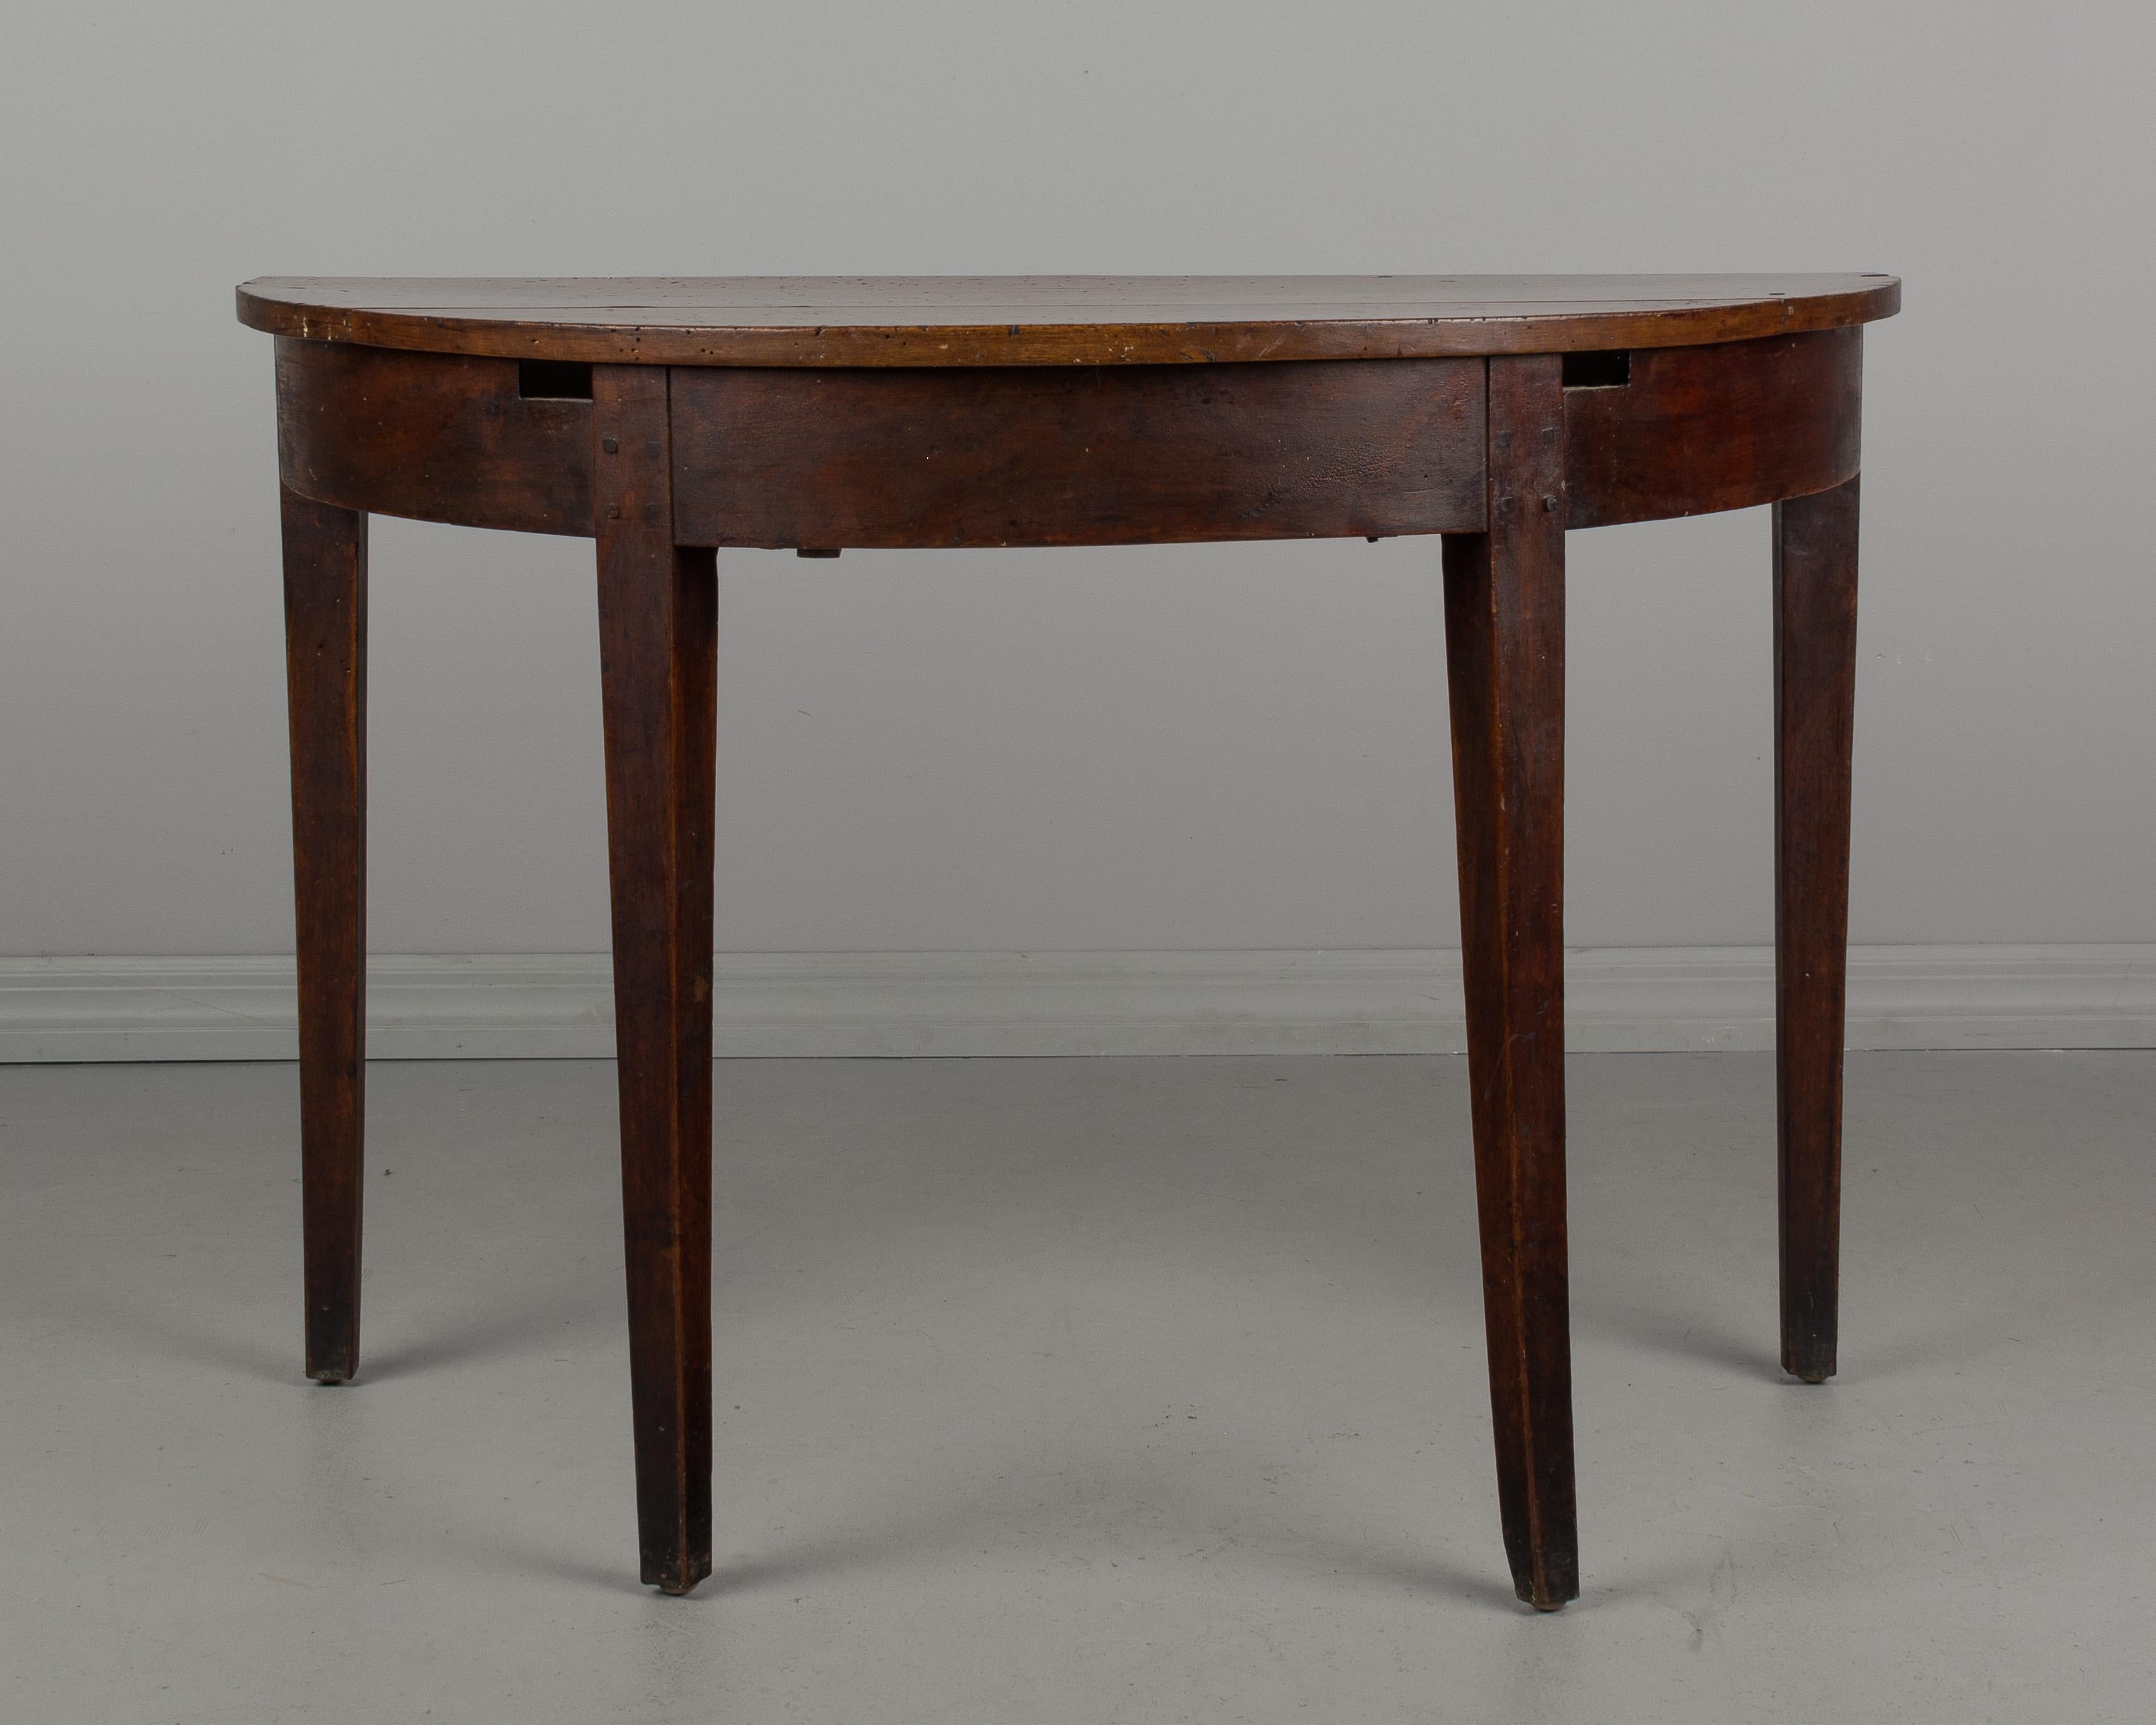 Hand-Crafted Early 19th Century Country French Table